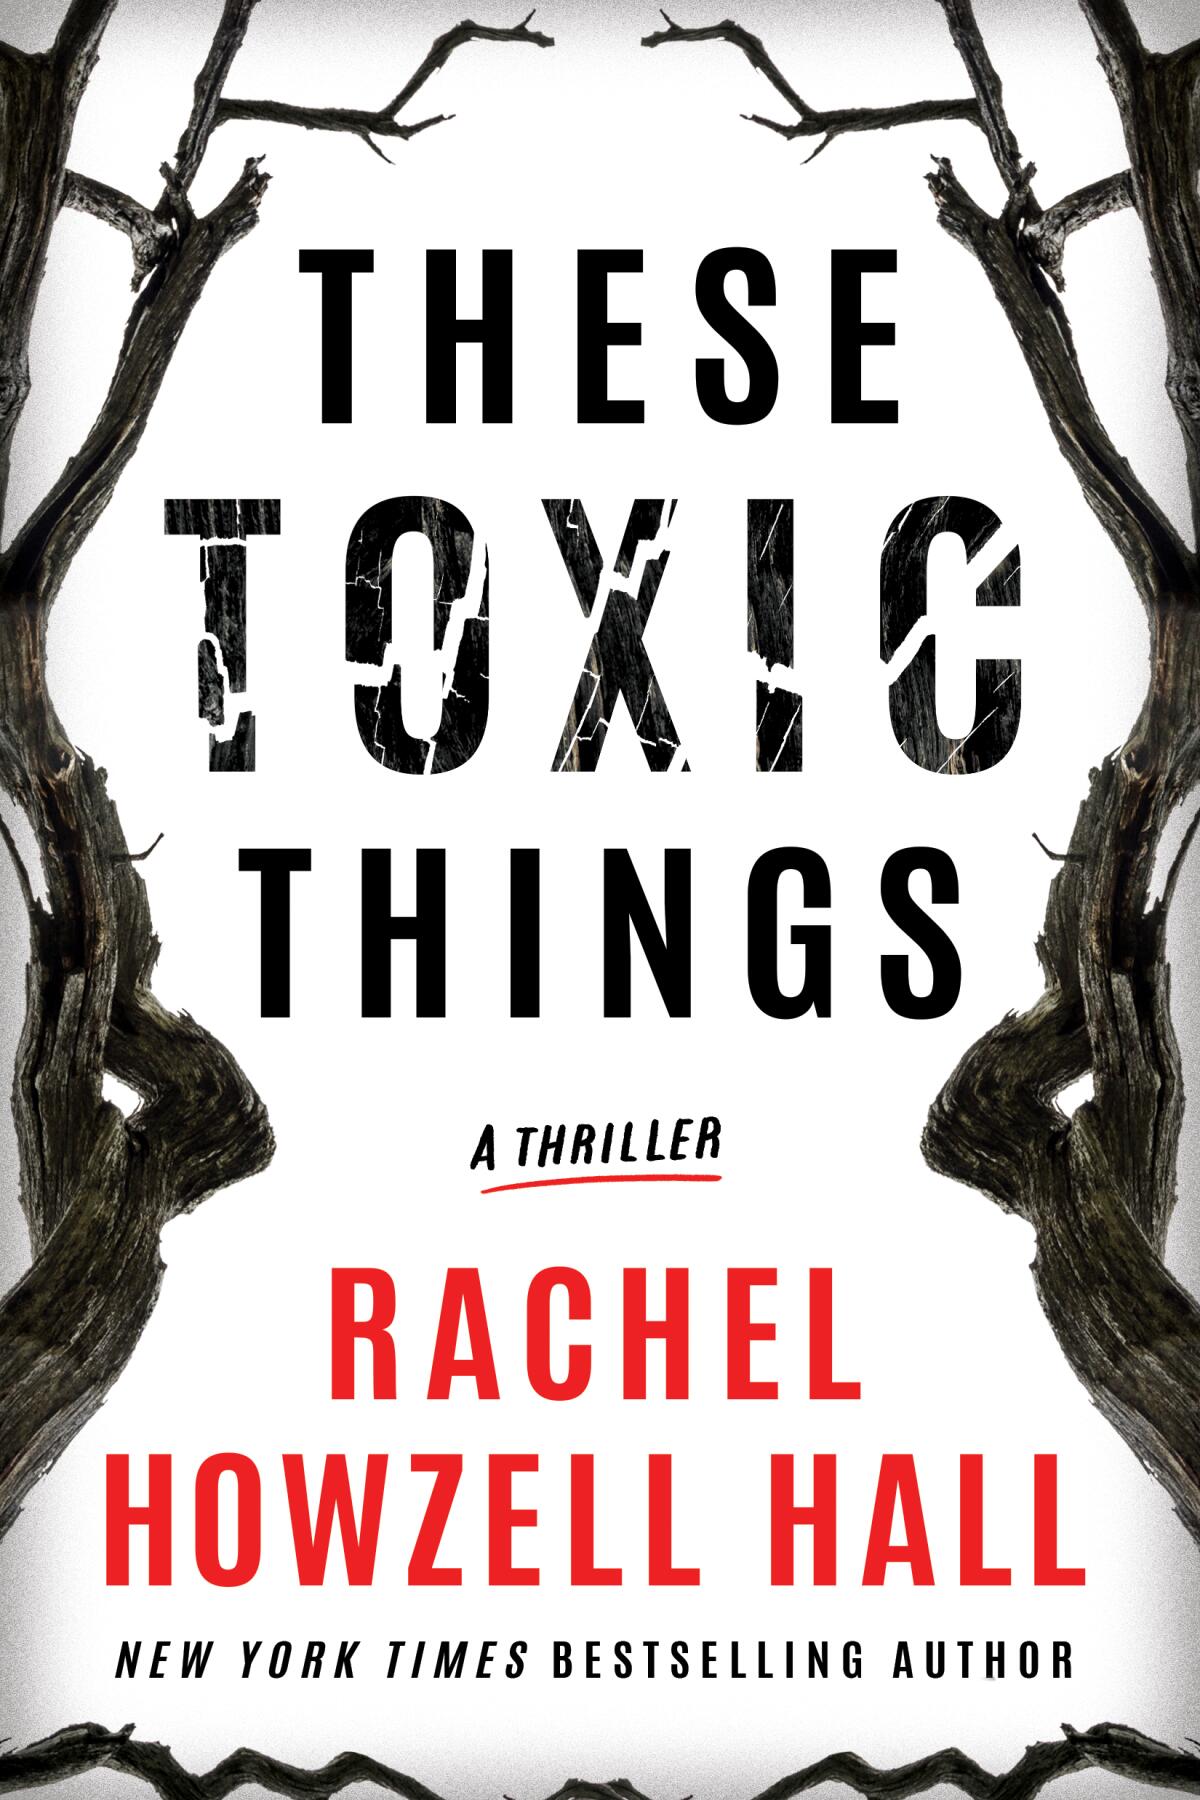 Book cover of "These Toxic Things" by Rachel Howzell Hall